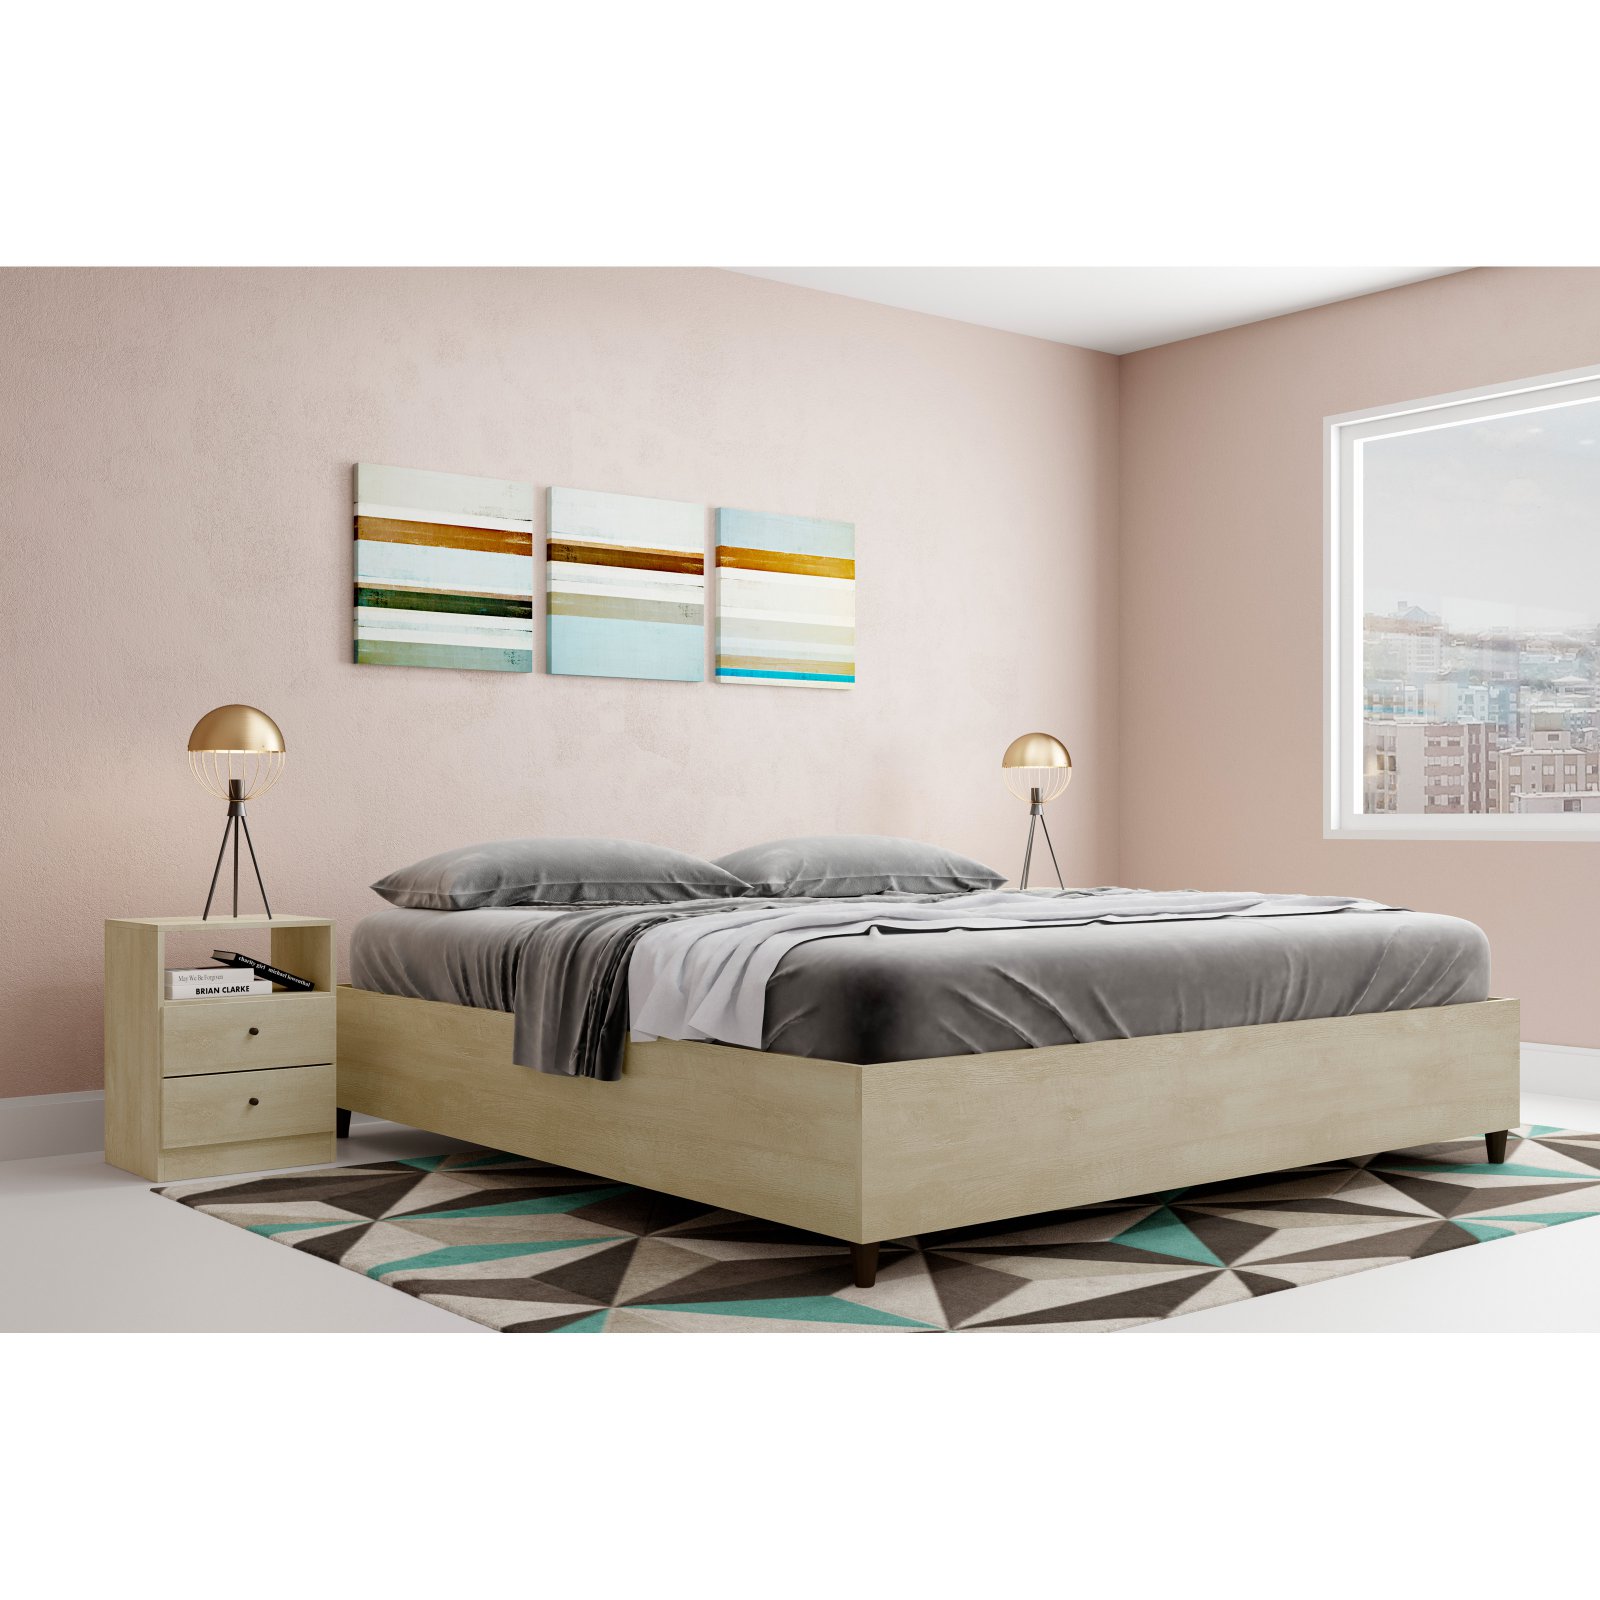 Midtown Concept Kansas Mid-Century Platform Bed with Headboard - image 5 of 11